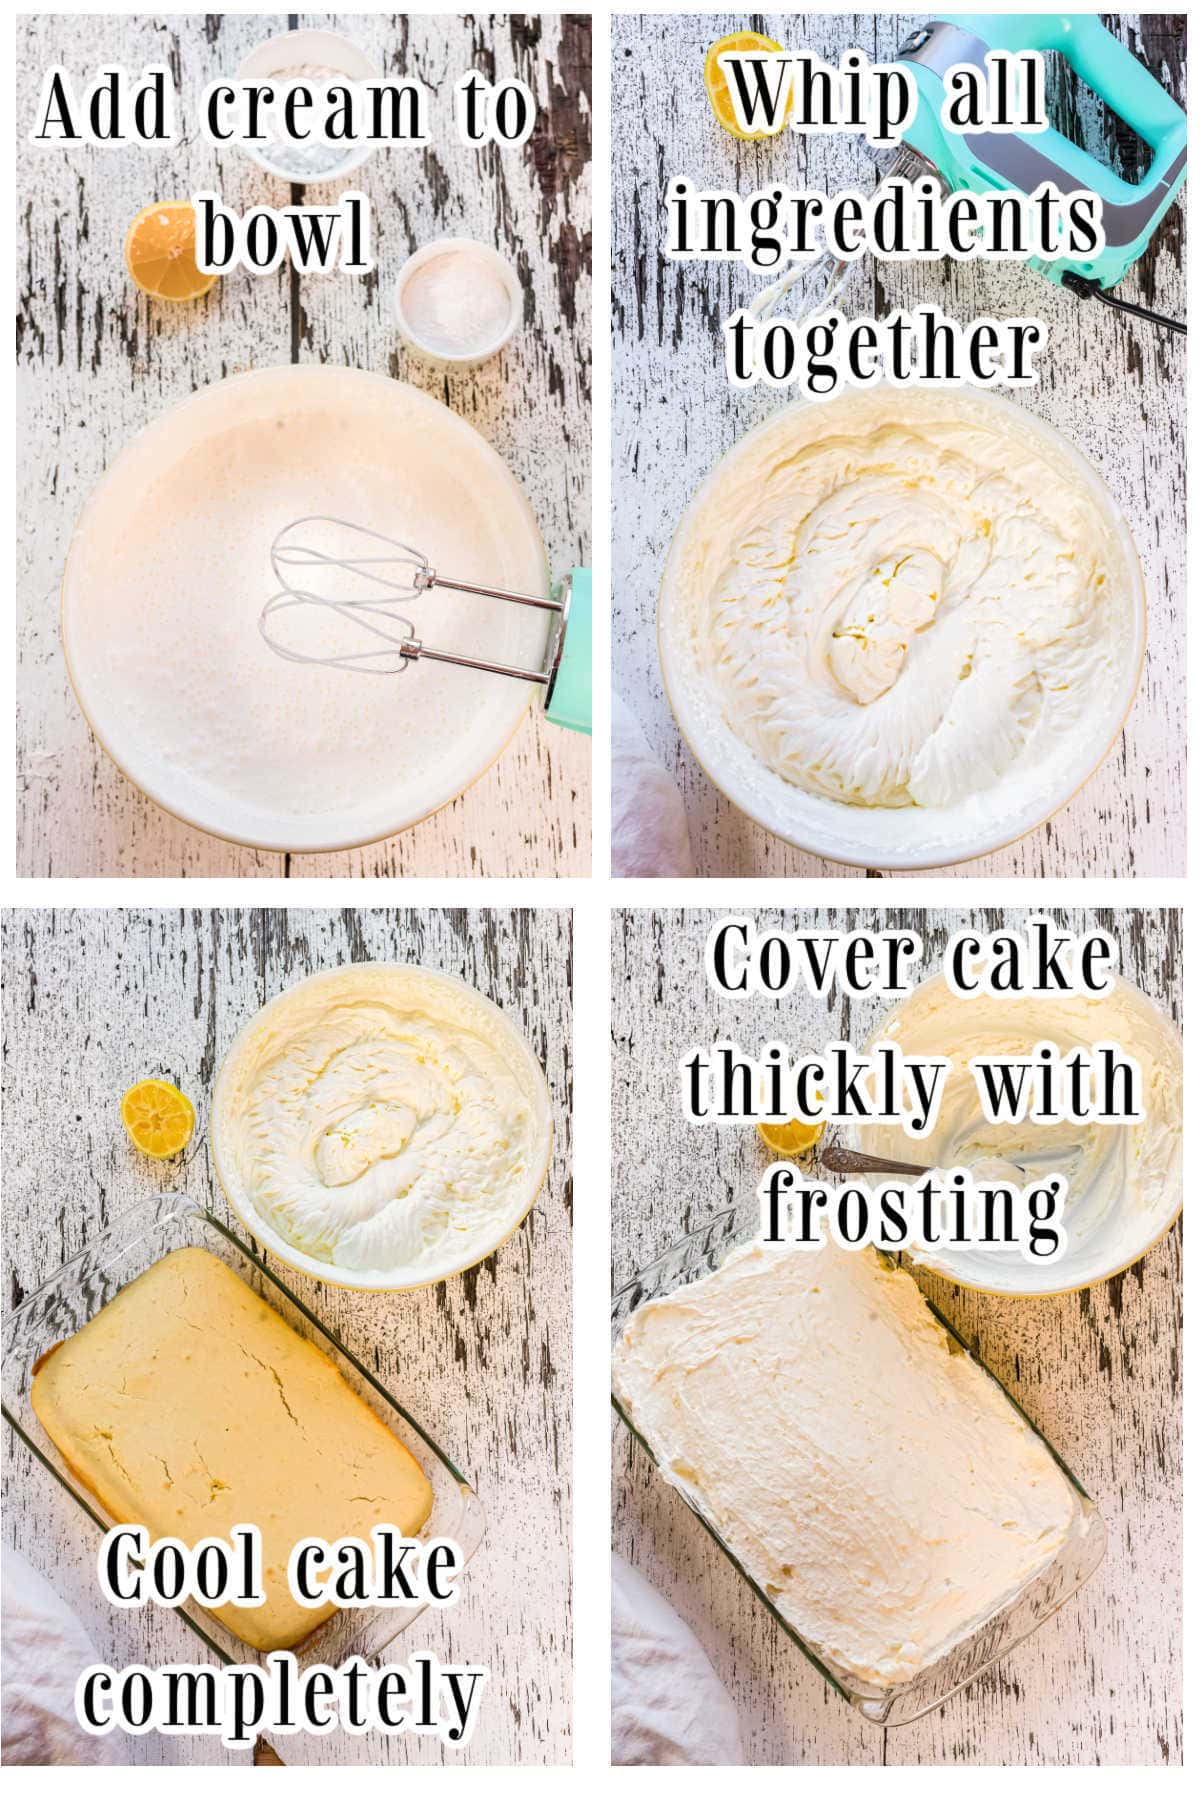 Step by step images for making lemon cream frosting.